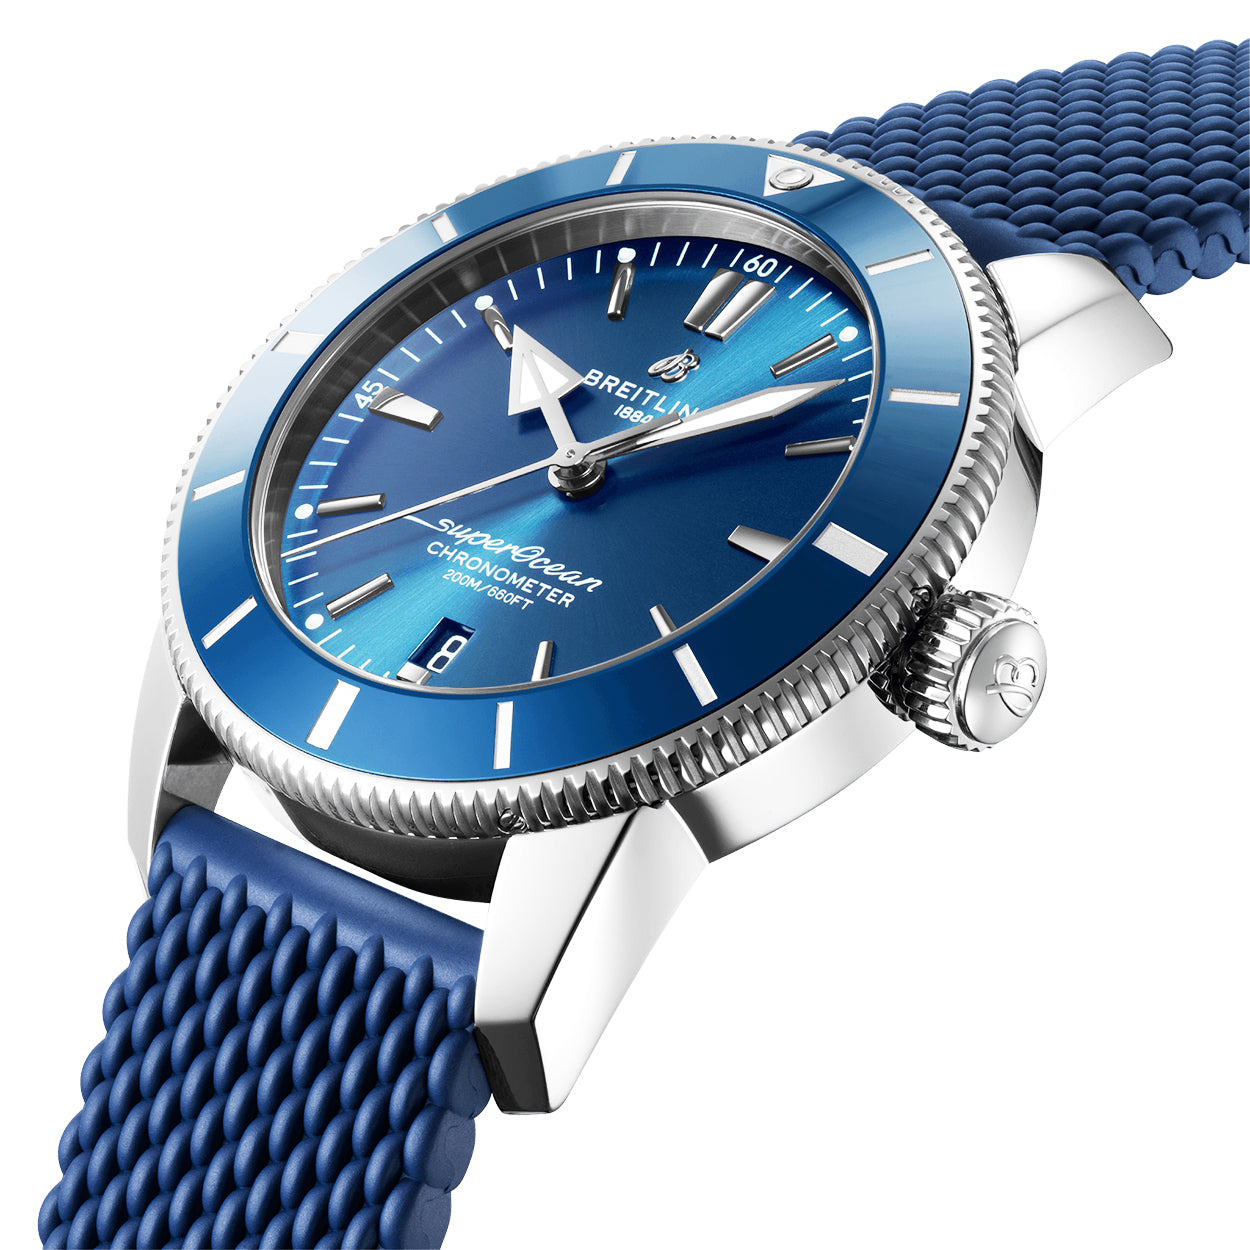 Superocean Heritage II 44mm Blue Dial Automatic Rubber Strap Watch